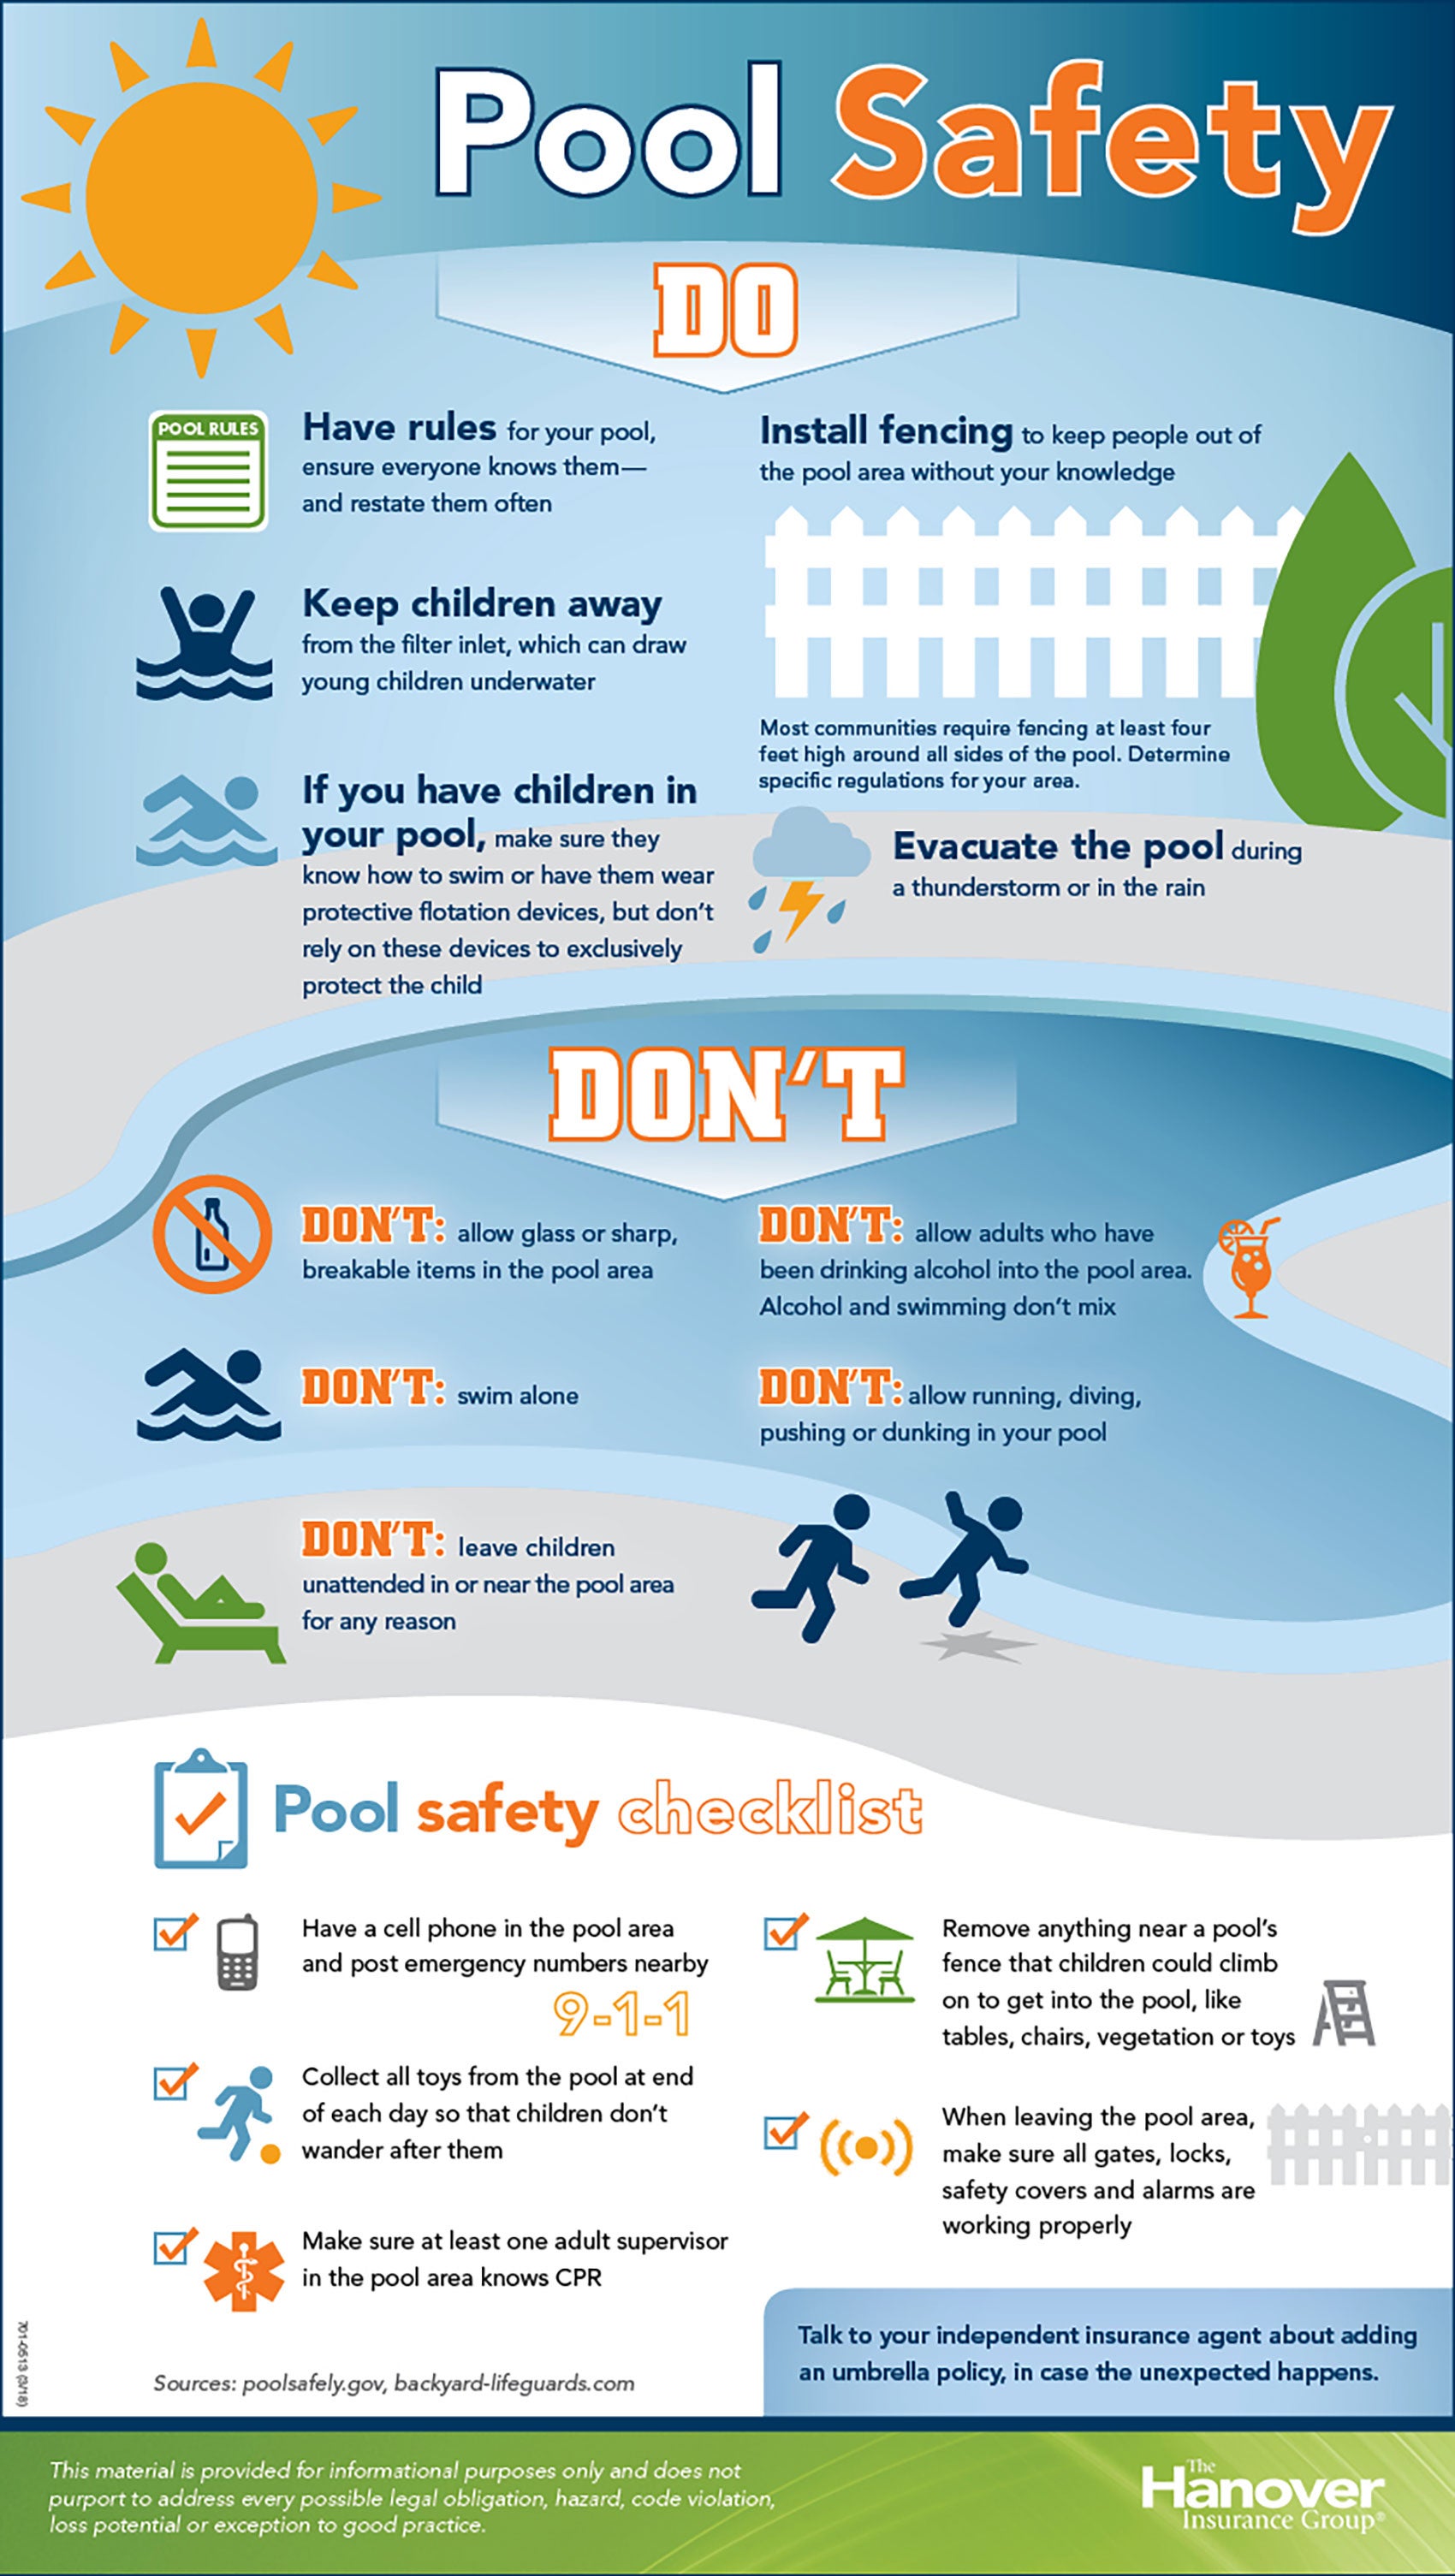 pool safety infographic including a safety checklist